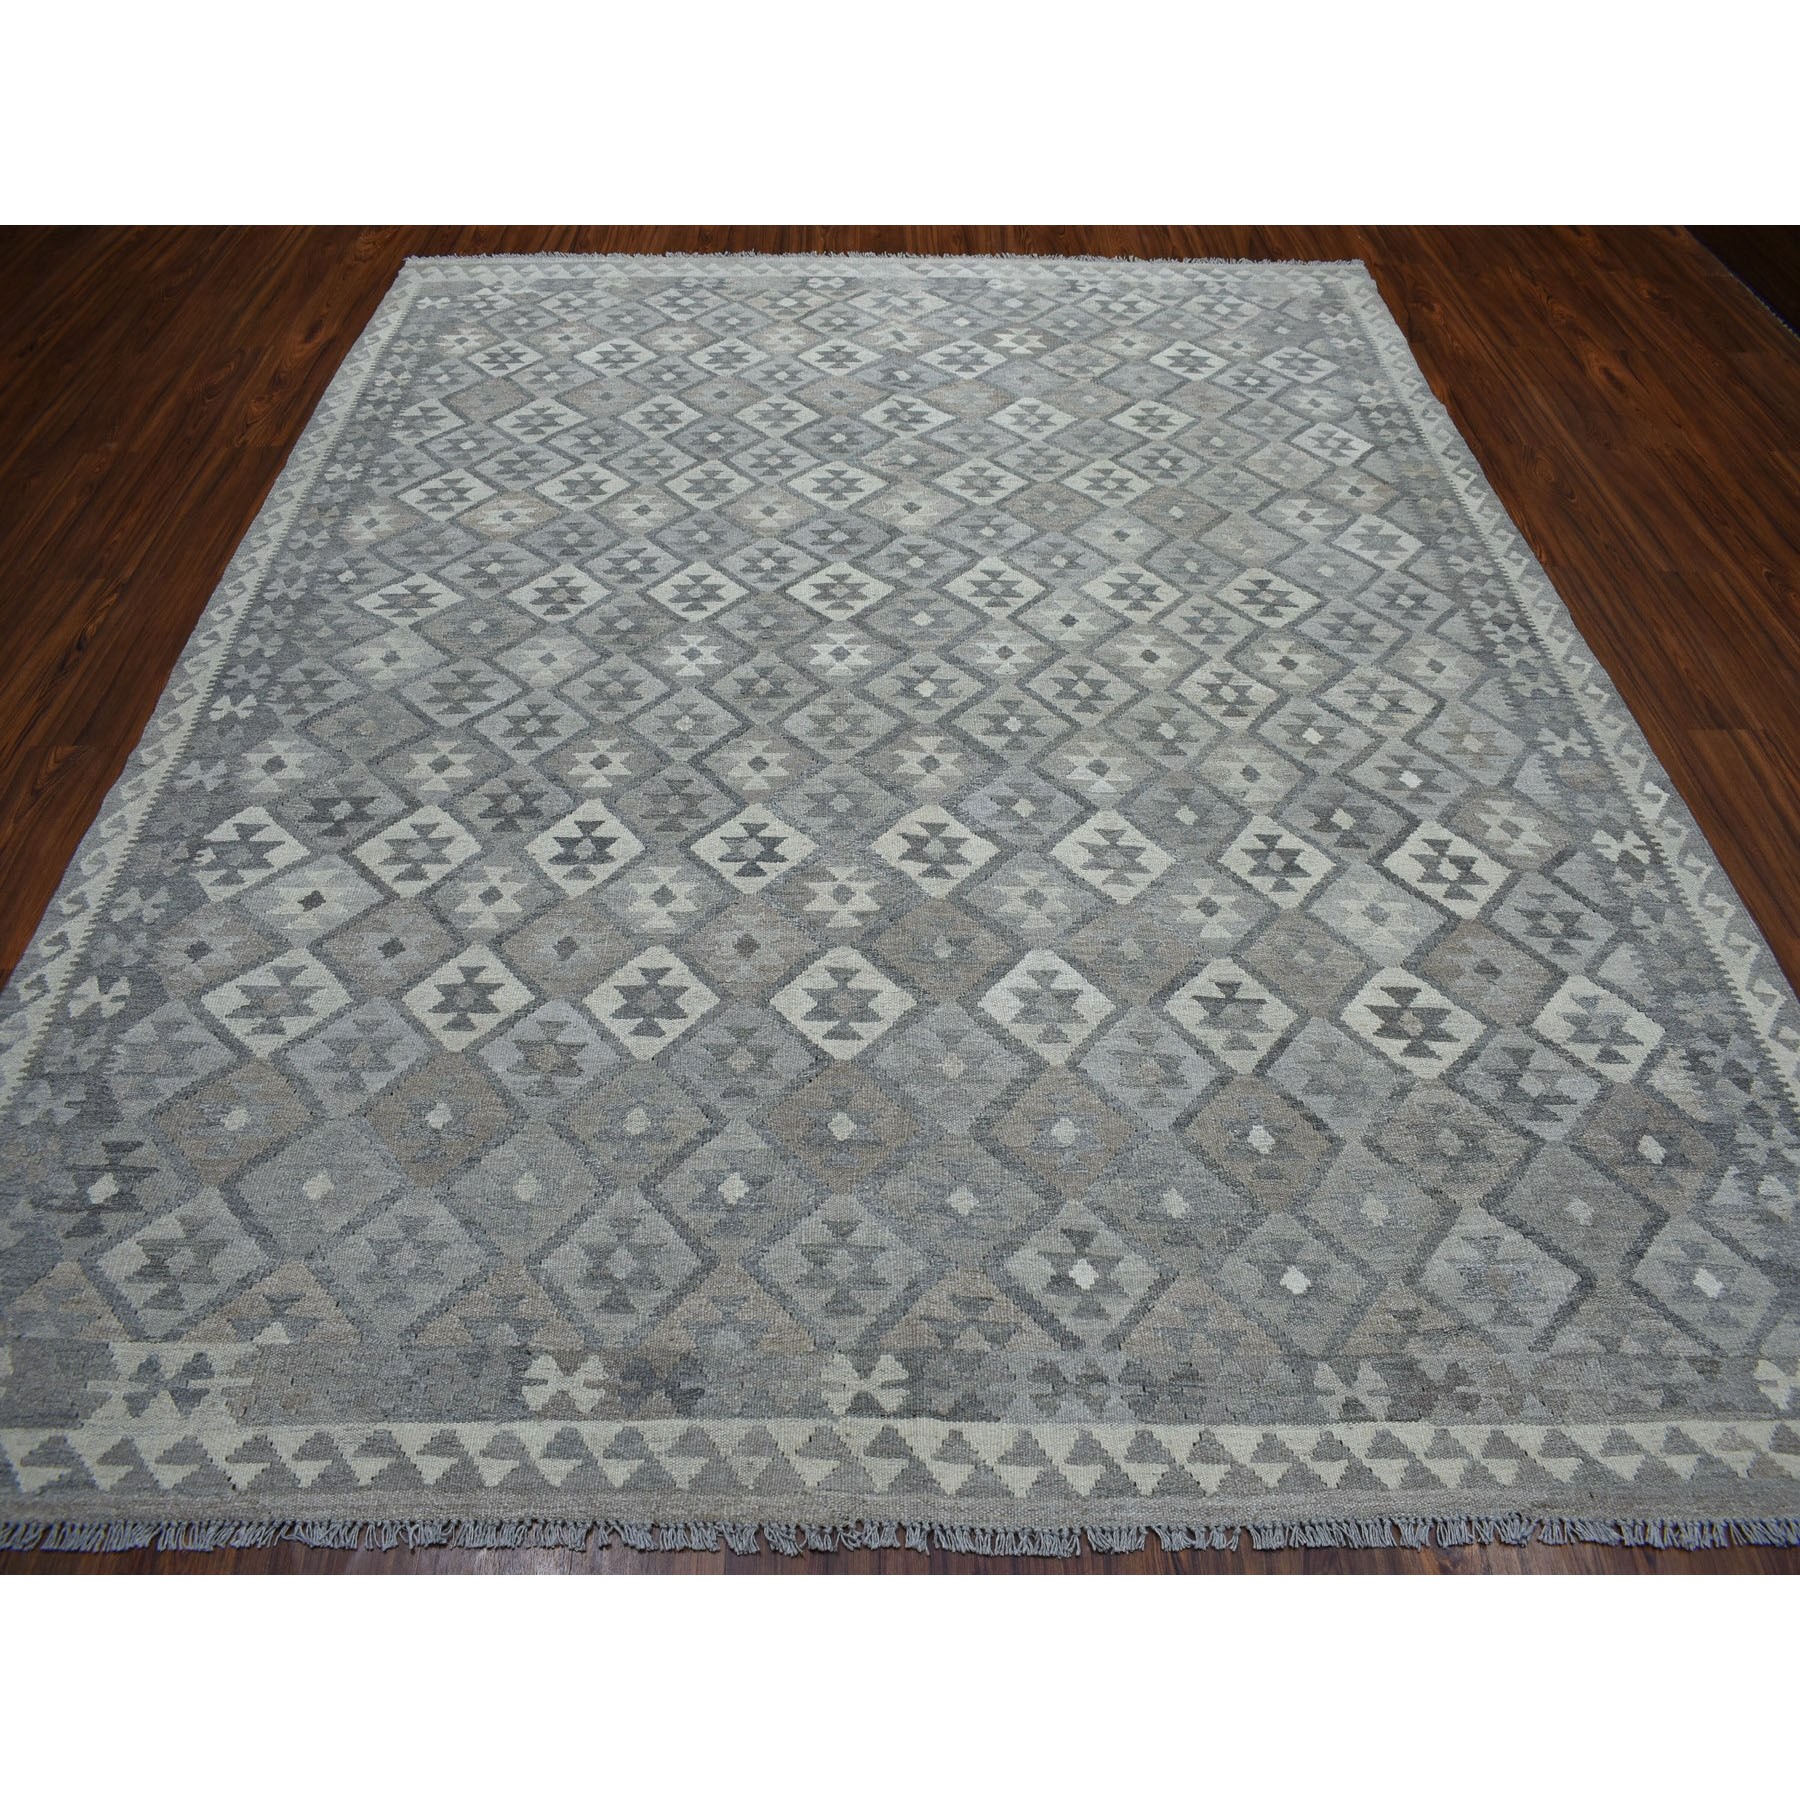 8-1 x9-10  Undyed Natural Wool Afghan Kilim Reversible Hand Woven Oriental Rug 